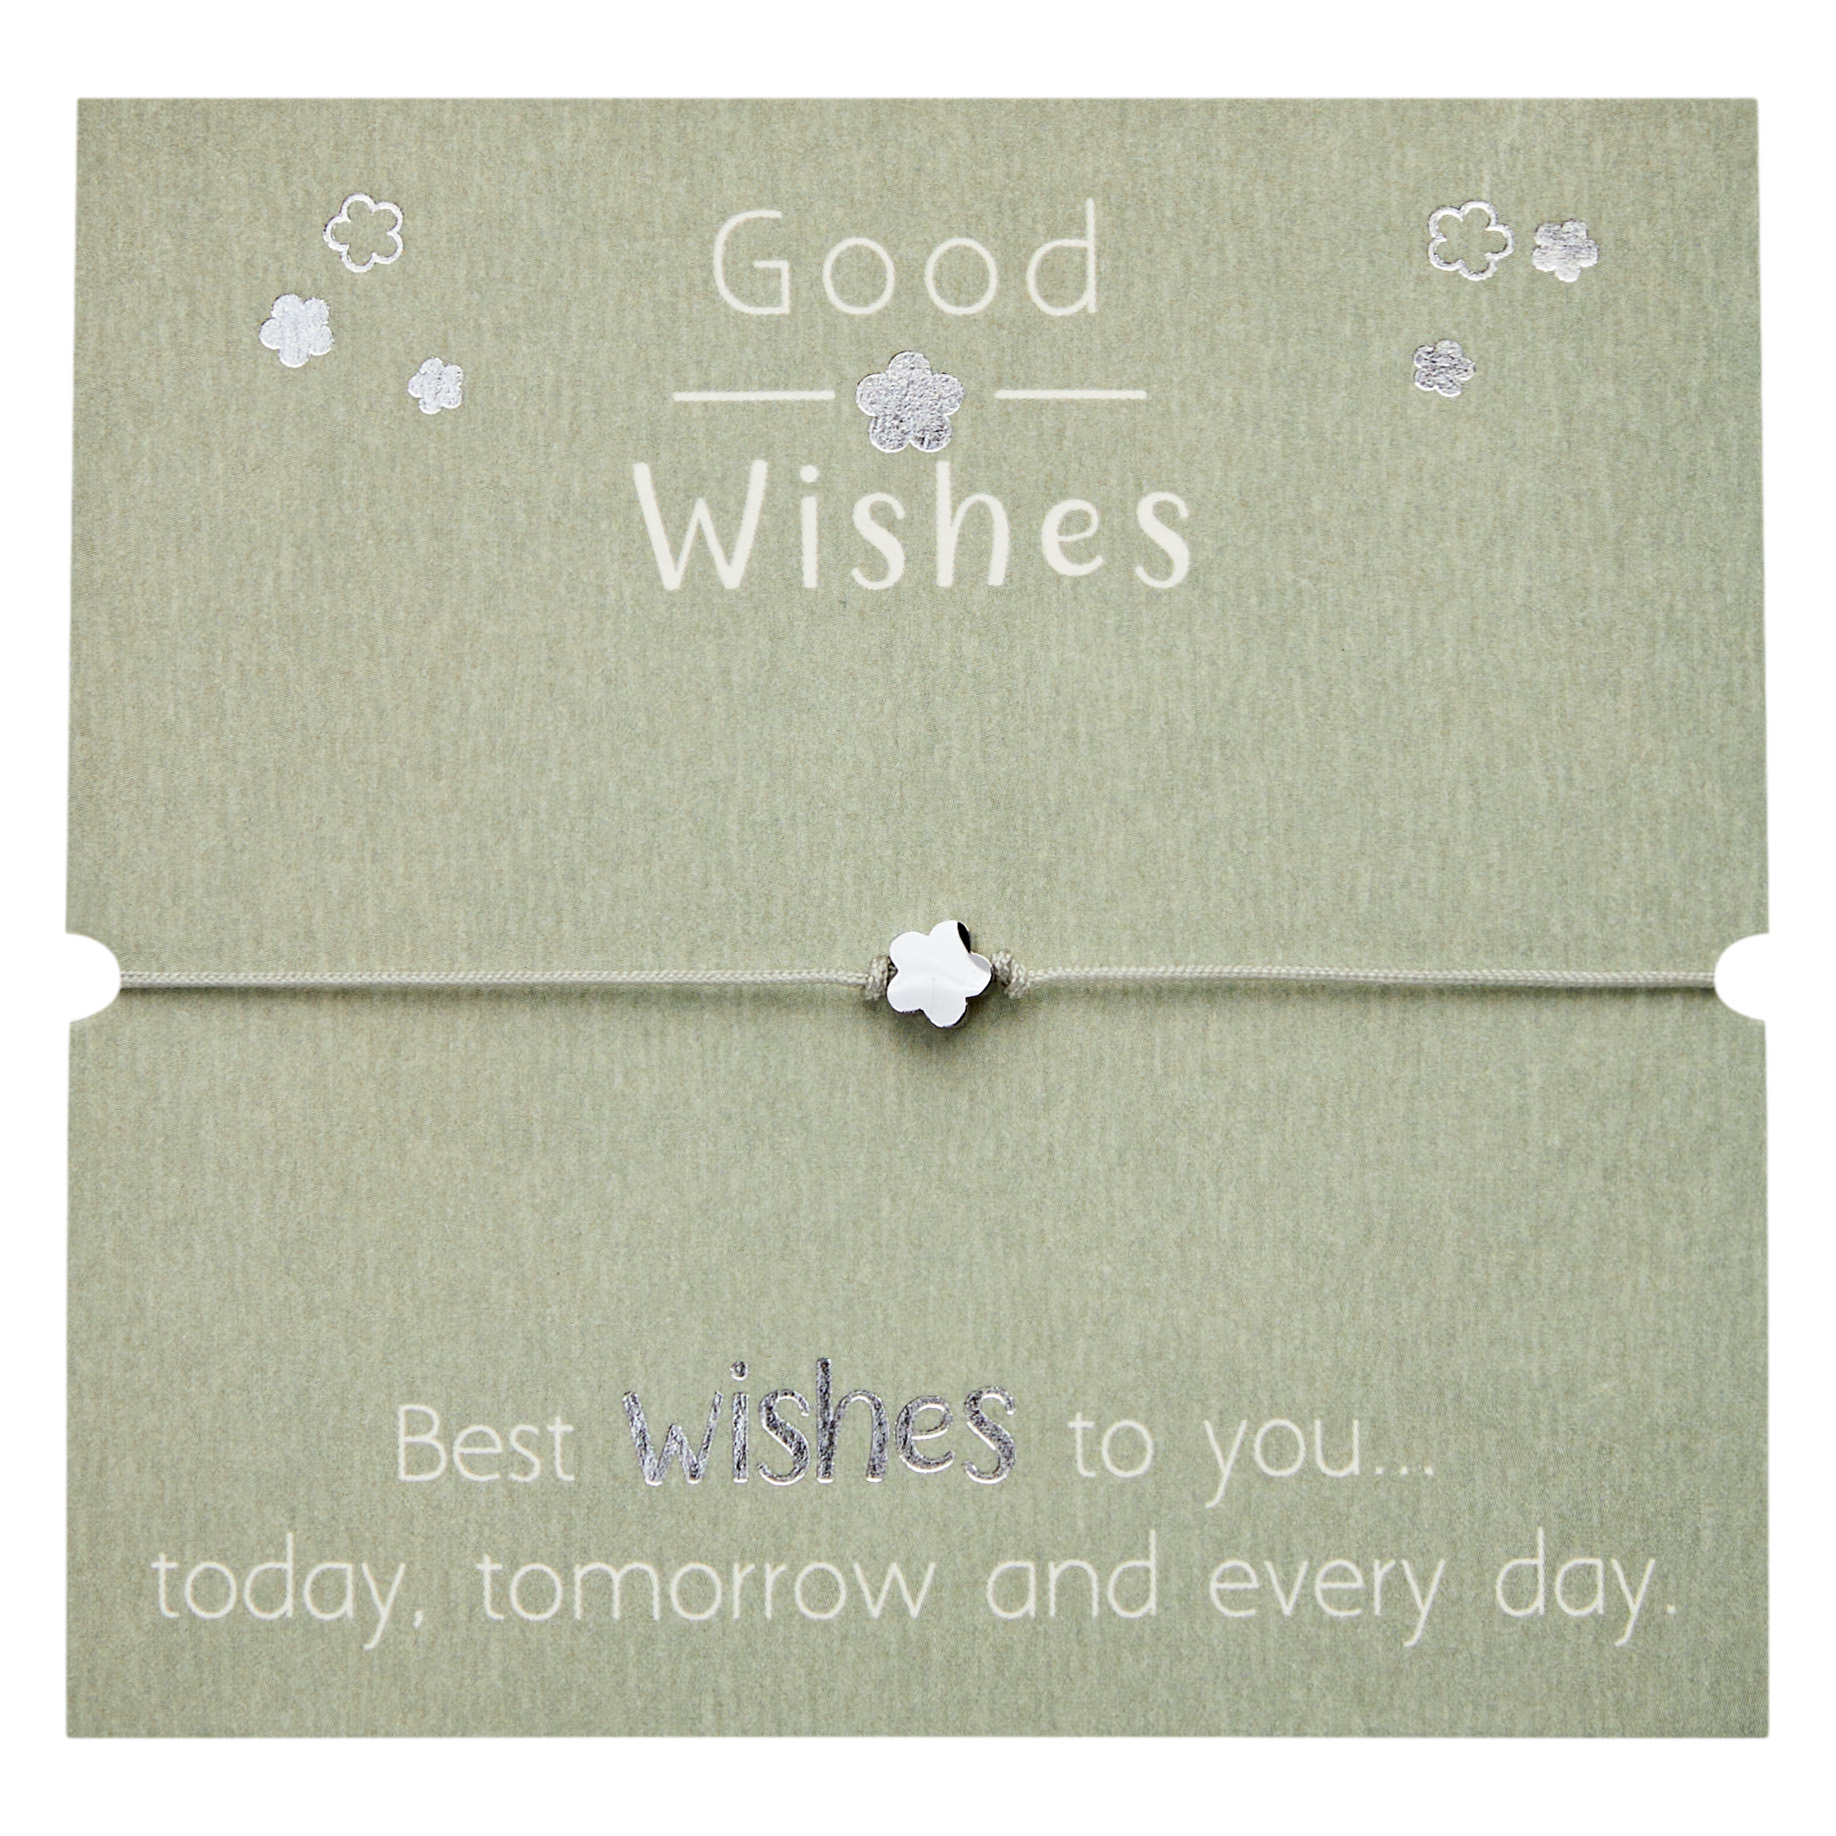 Dispaly bracelets "Good Wishes"